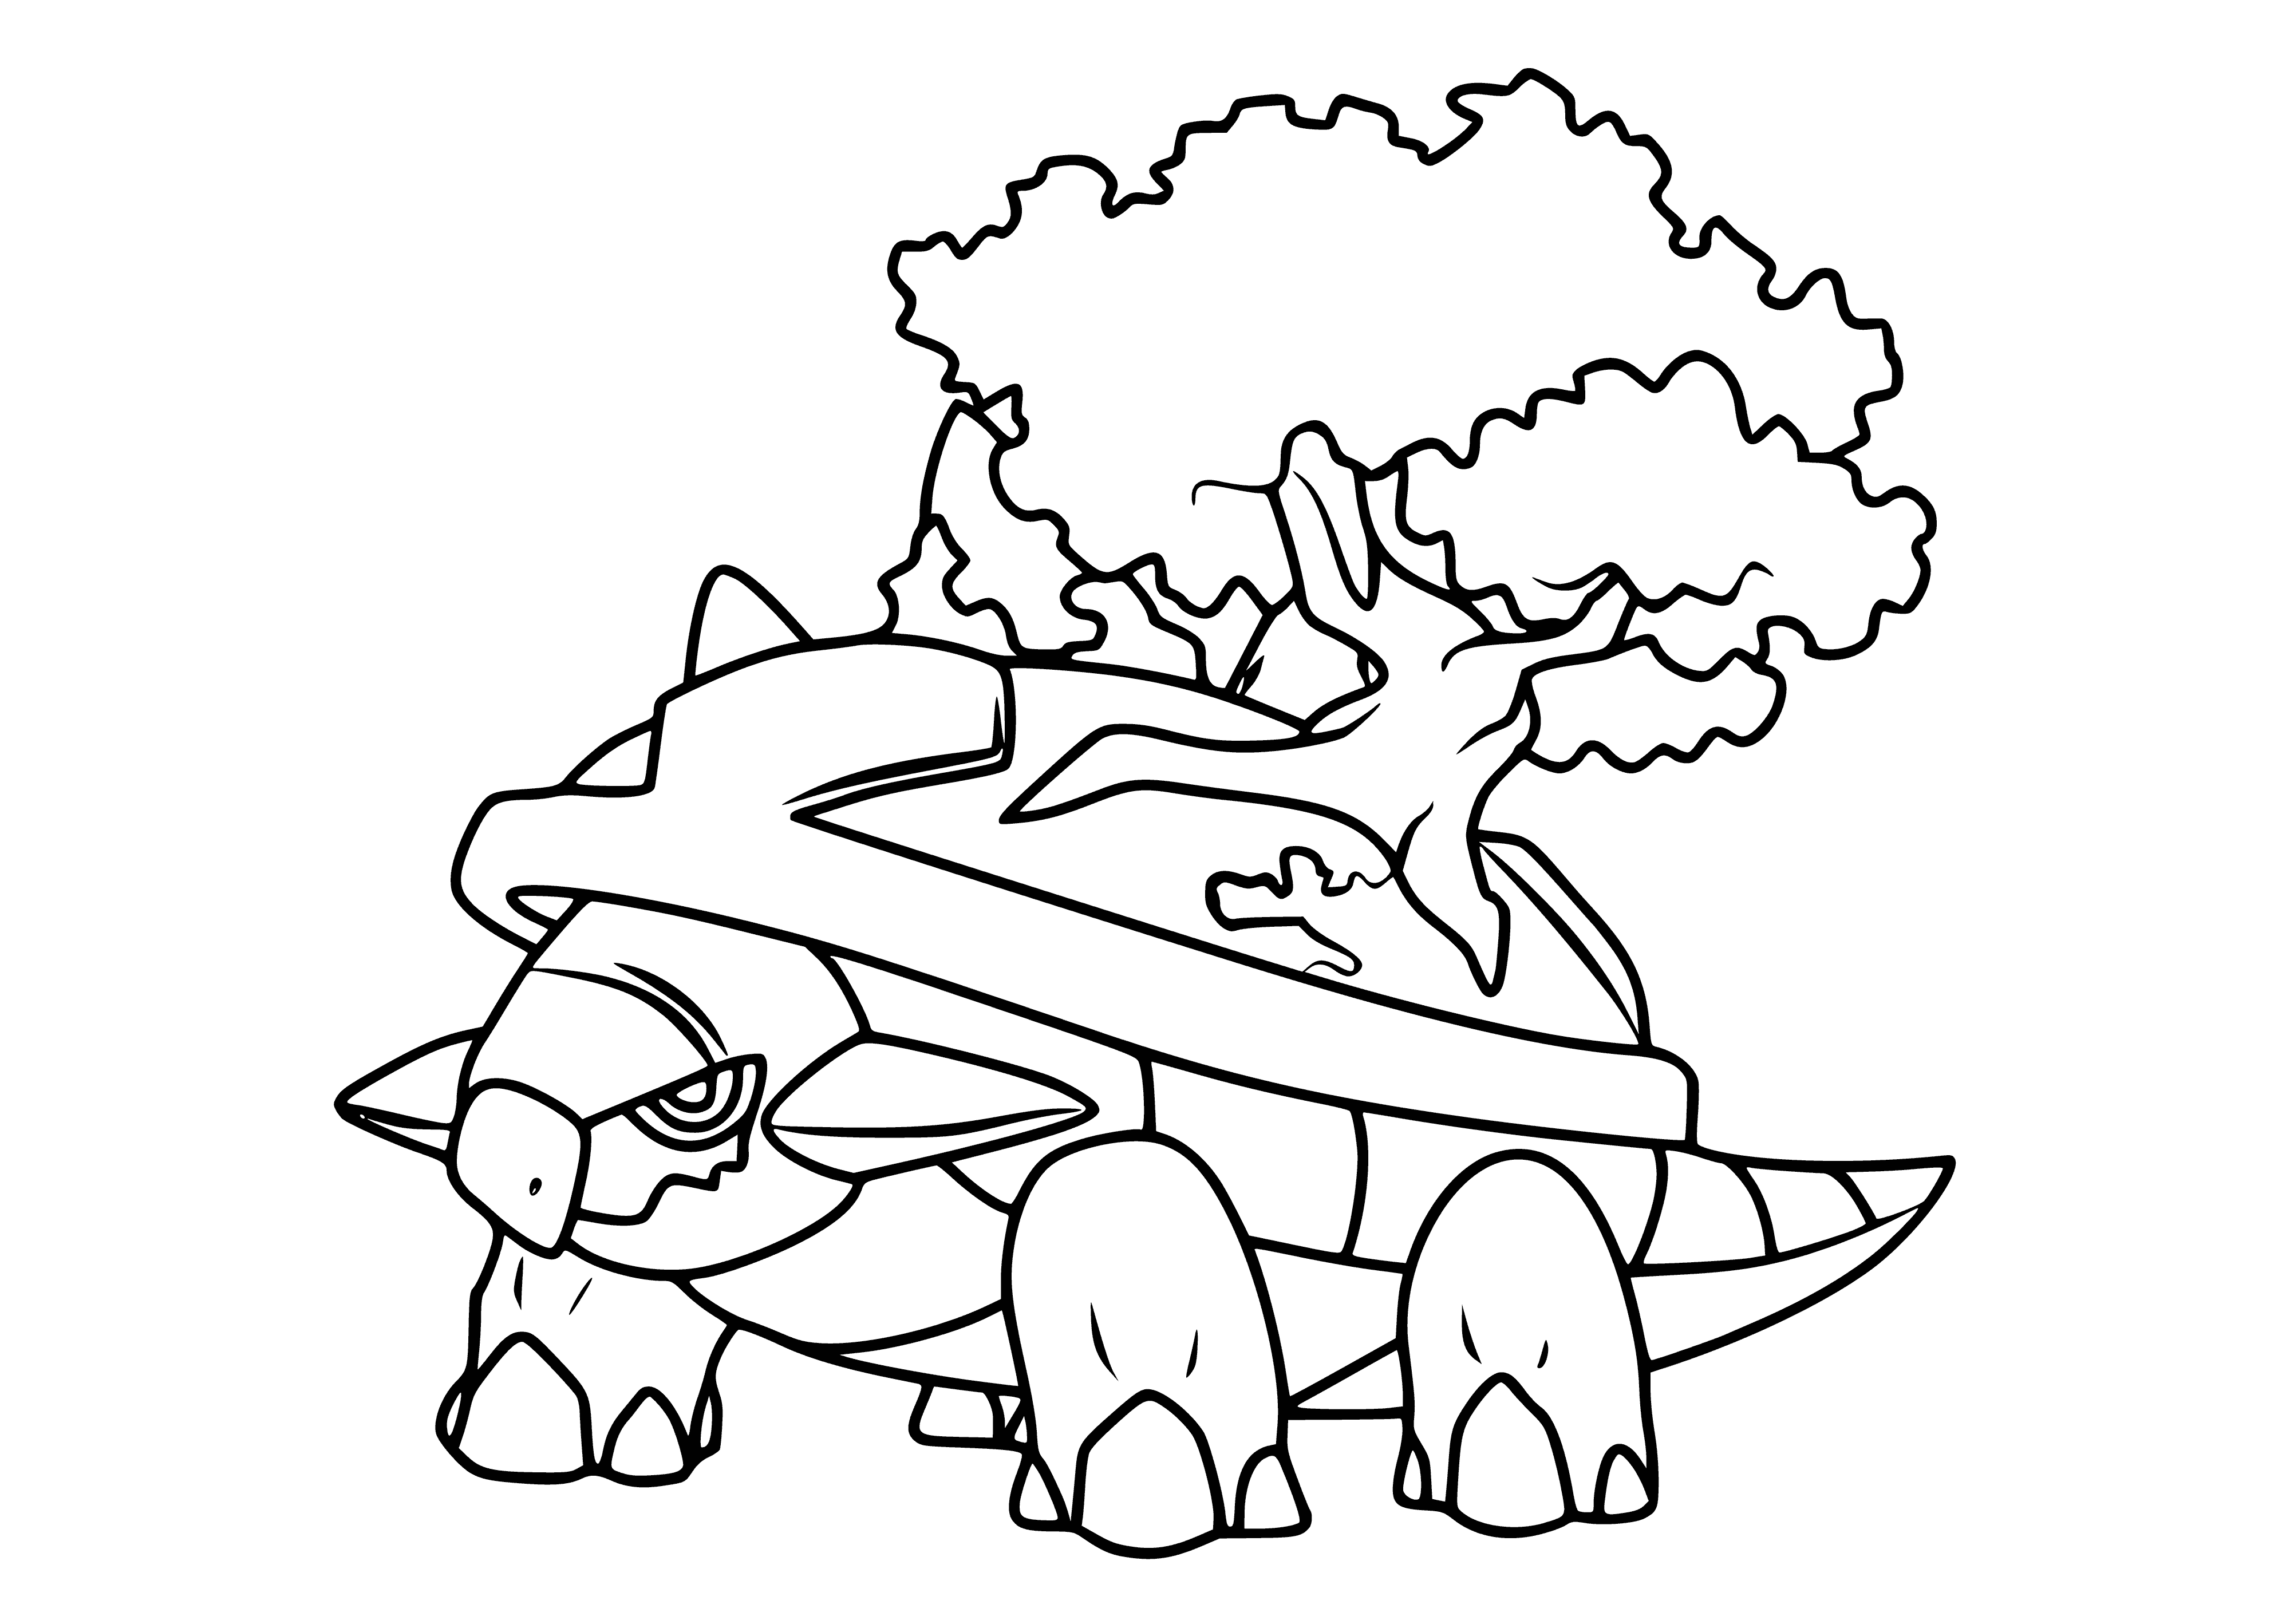 coloring page: Pokemon Torterra is a large green/brown Pokemon w/ a big shell, round head, small eyes, and stubby arms/legs.